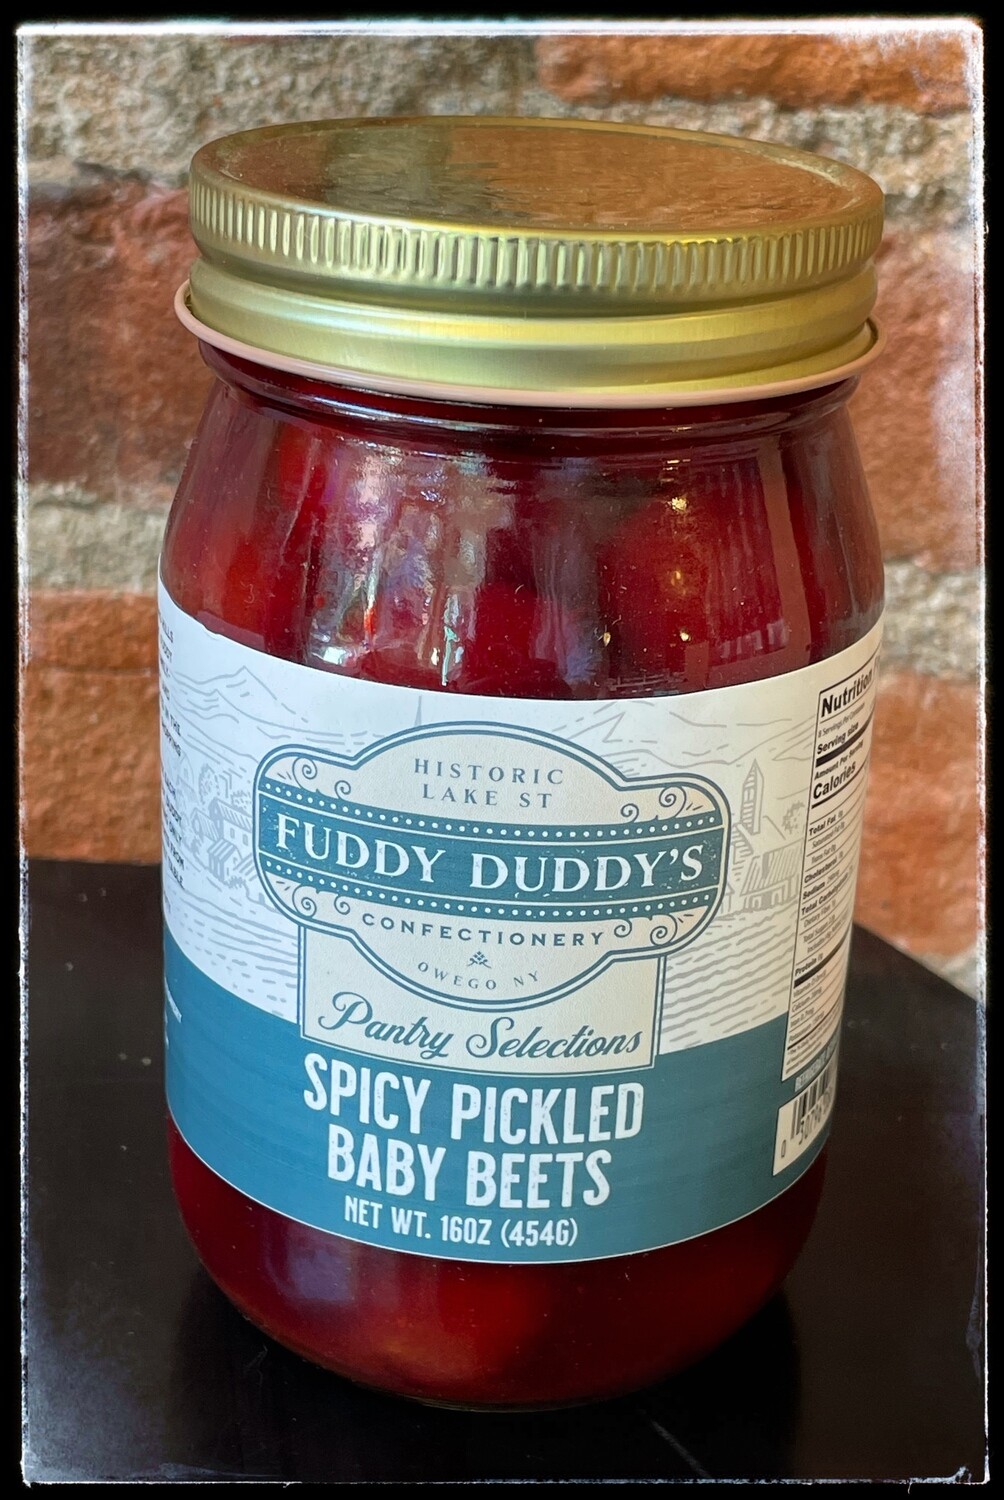 Fuddy Duddy's Spicy Pickled Baby Beets